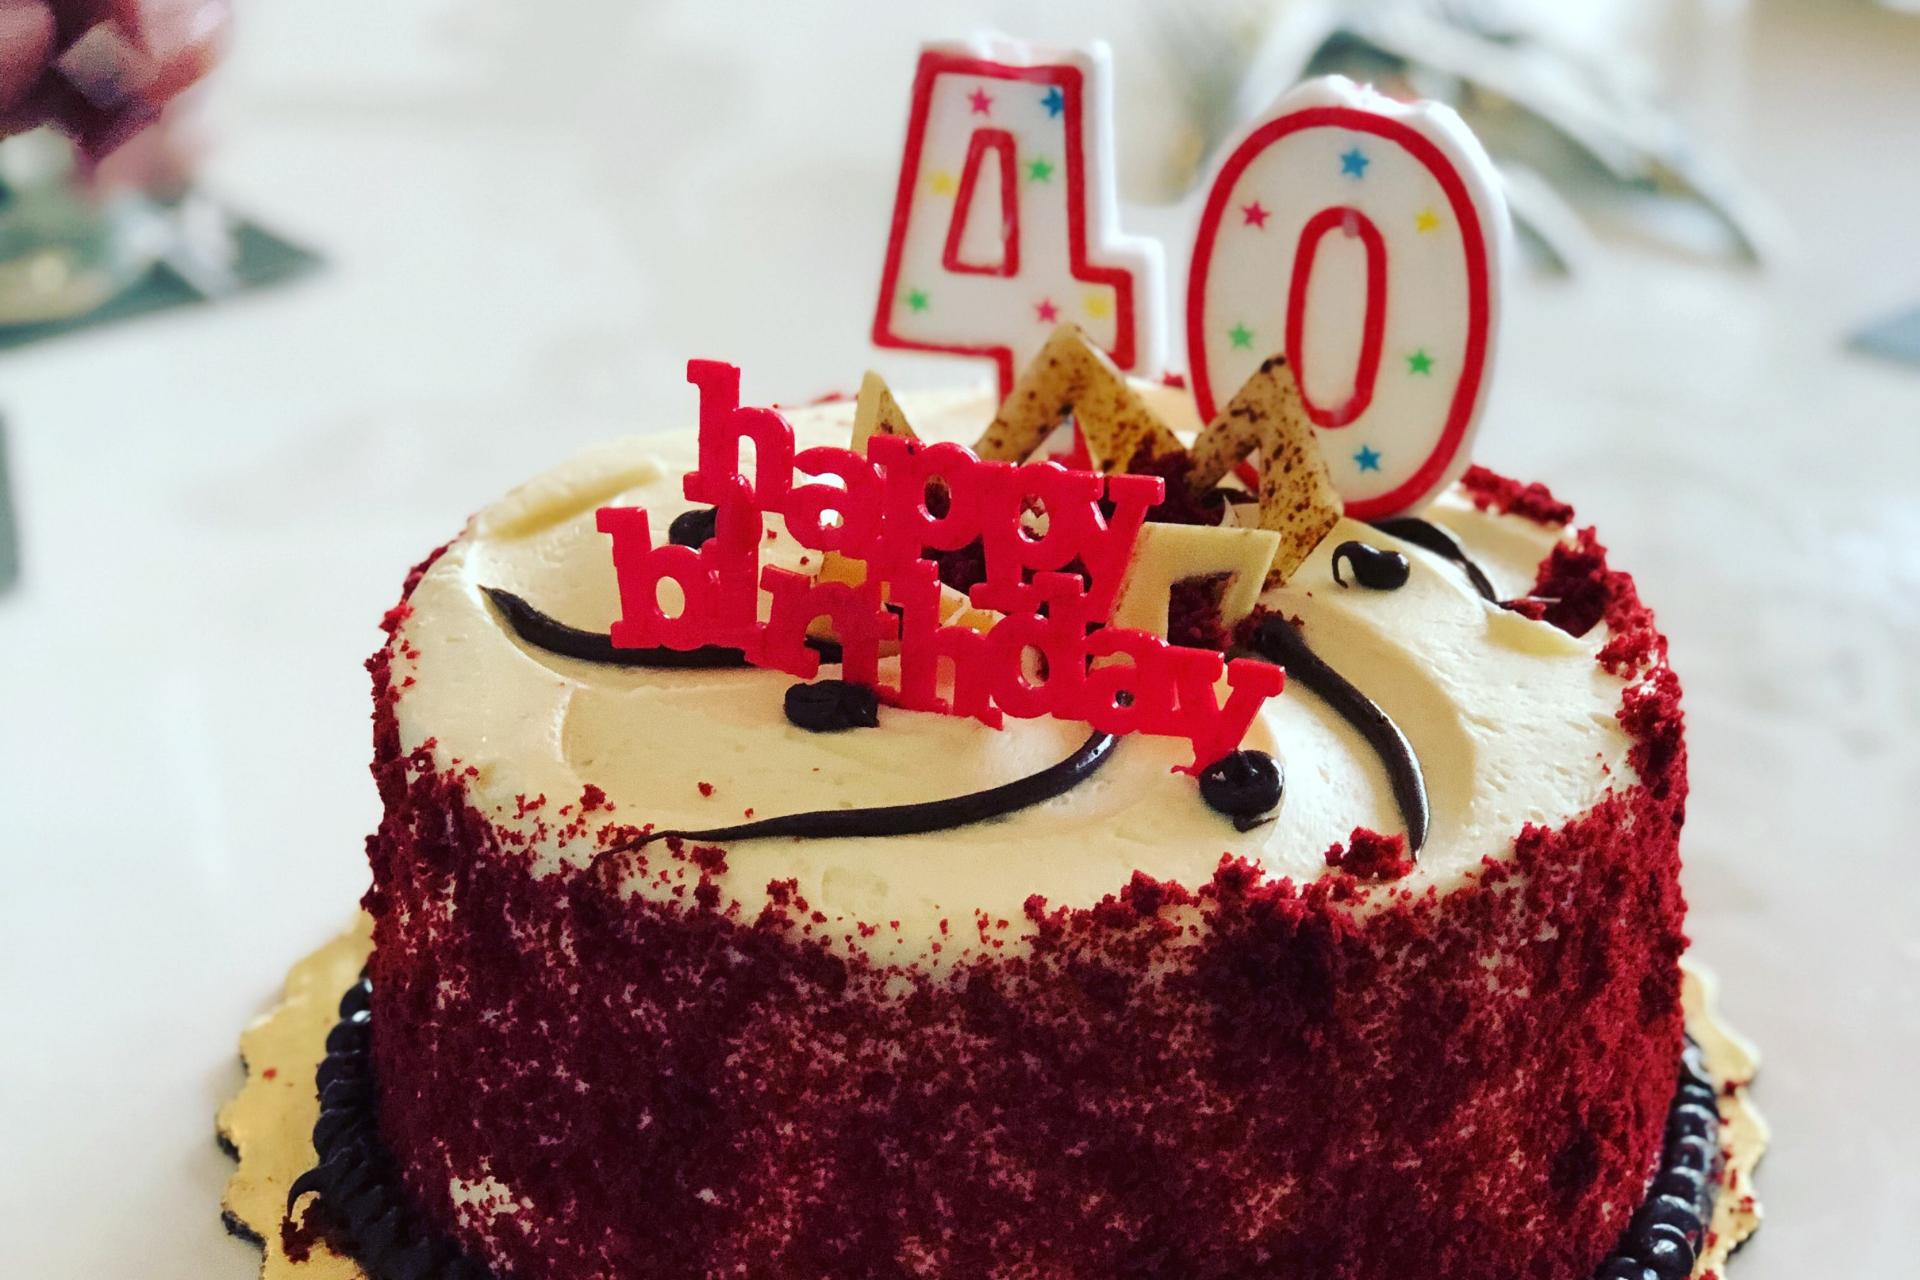 40th birthday cake in a restaurant table